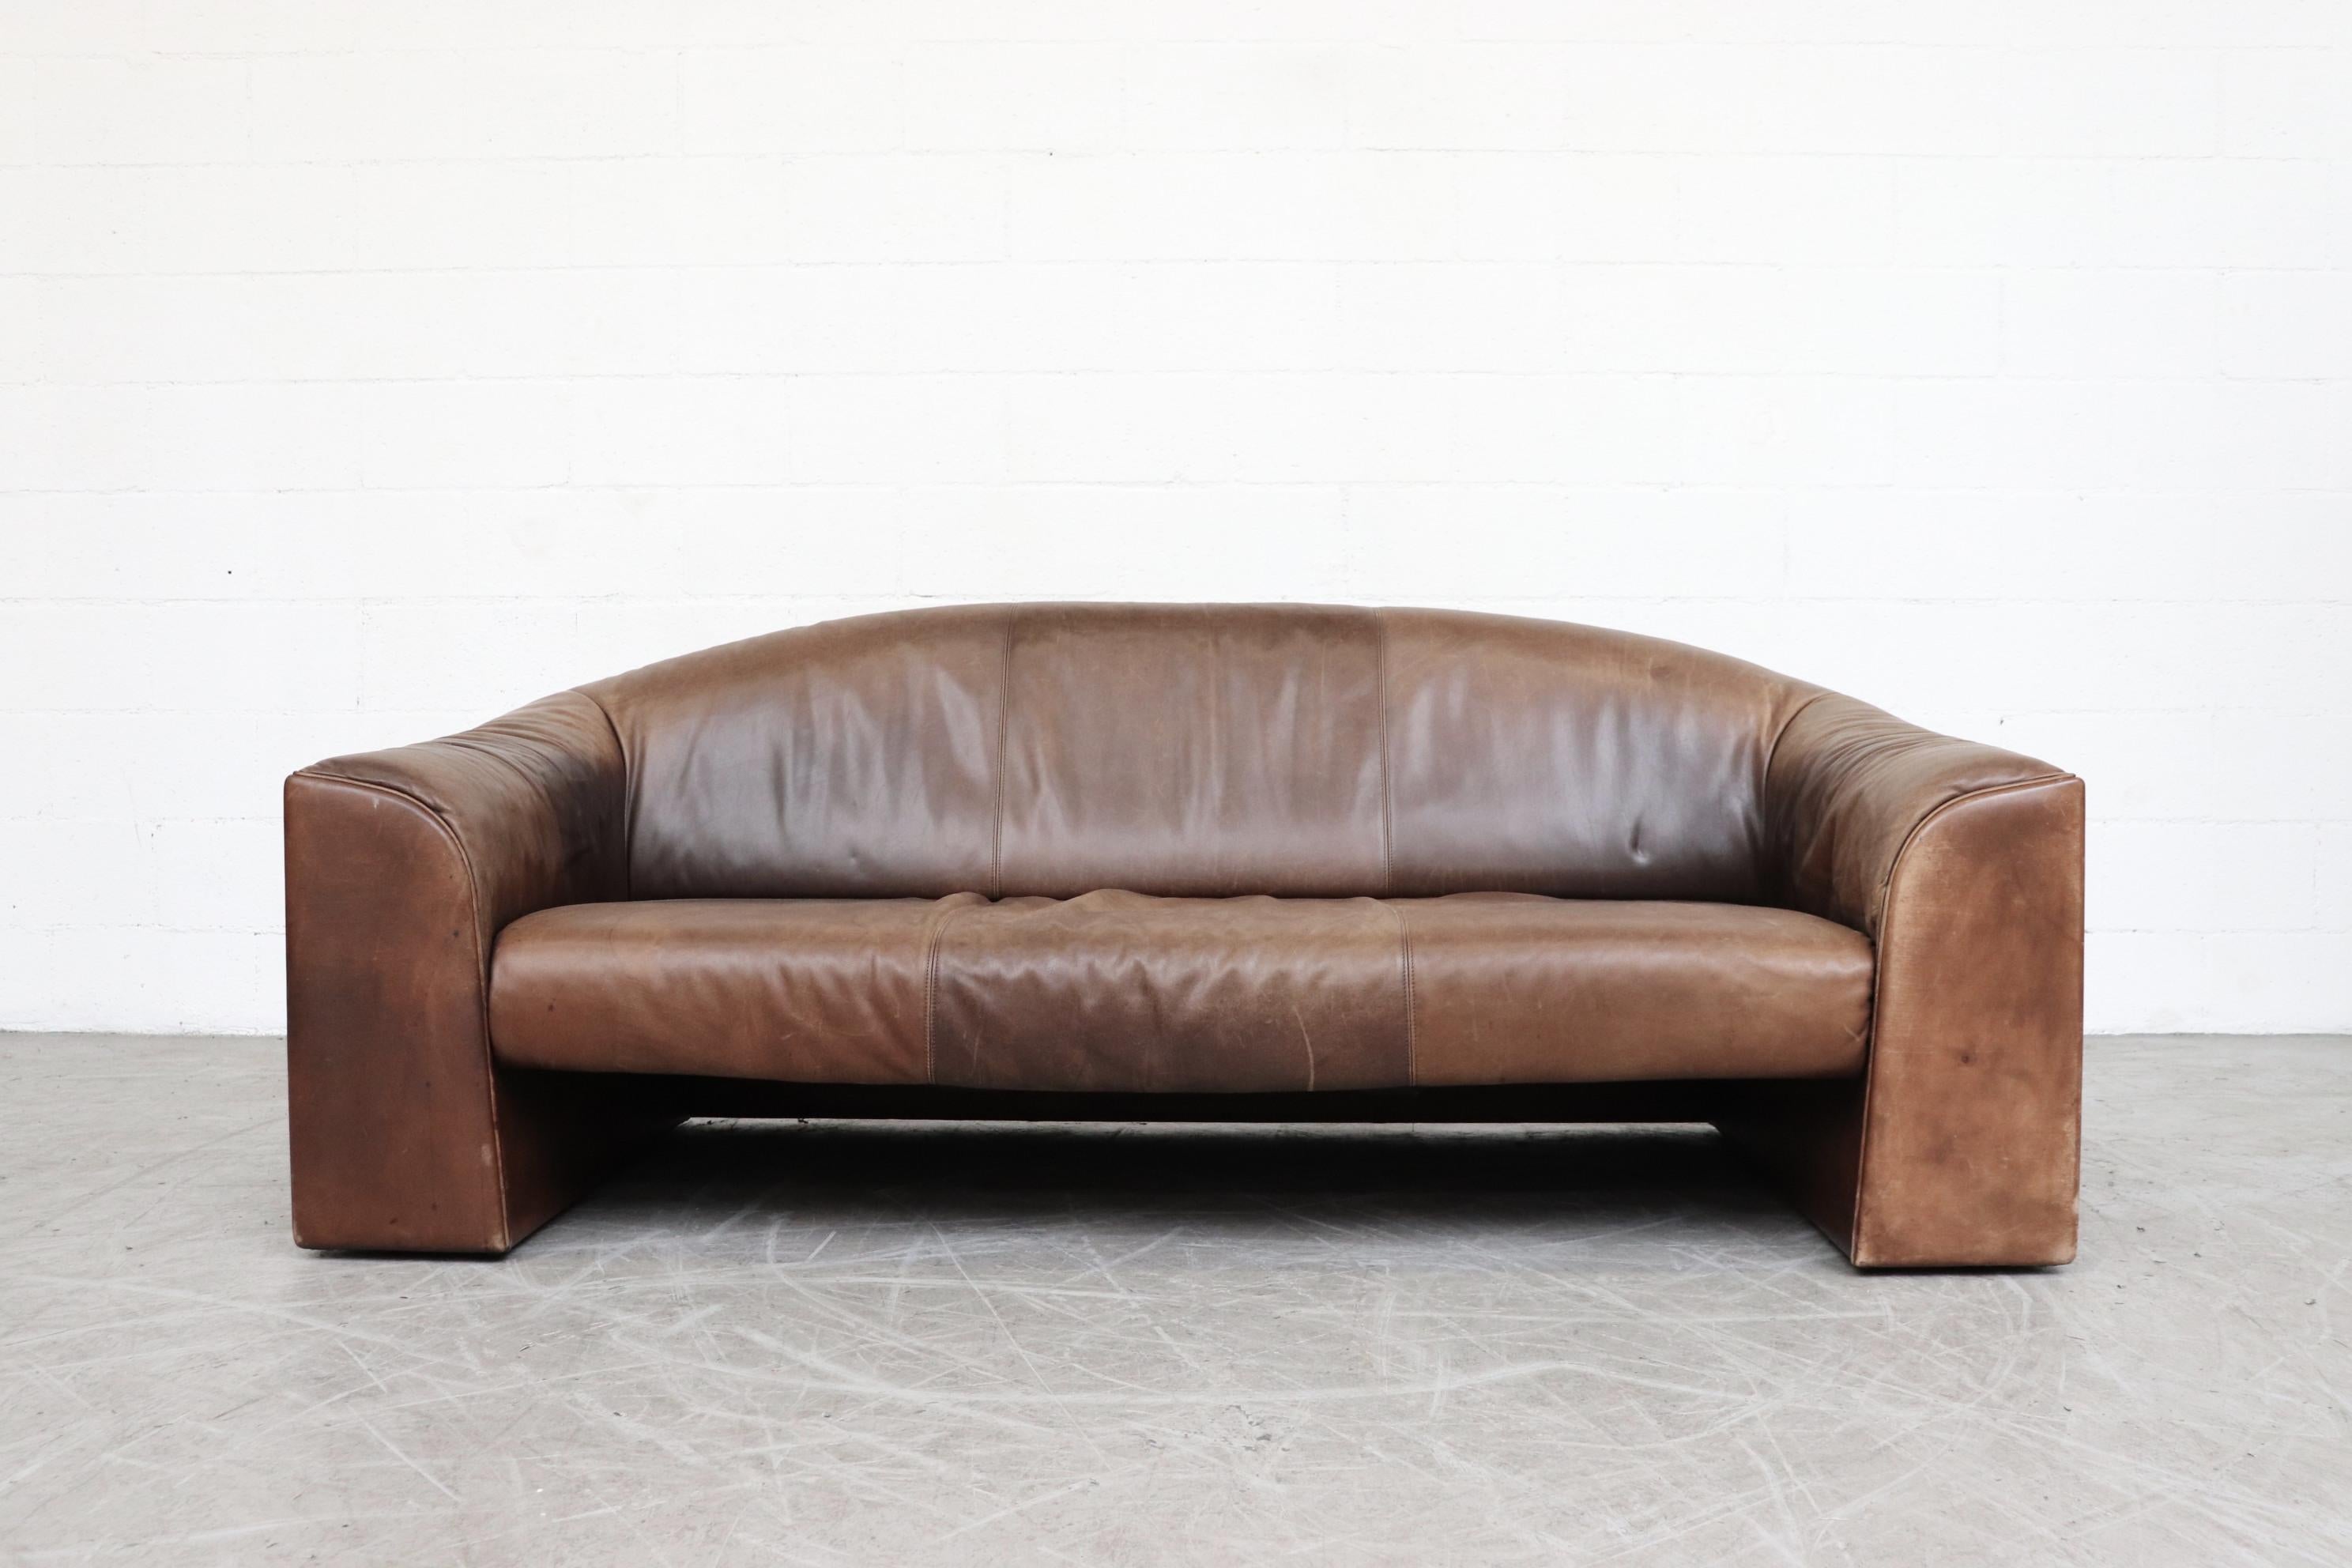 Large handsome midcentury 3-seat sofa by Walter Knoll. Thick natural brown leather with nice heavy patina. Good original condition with visible wear consistent with its age and use. Color varies slightly from photograph.